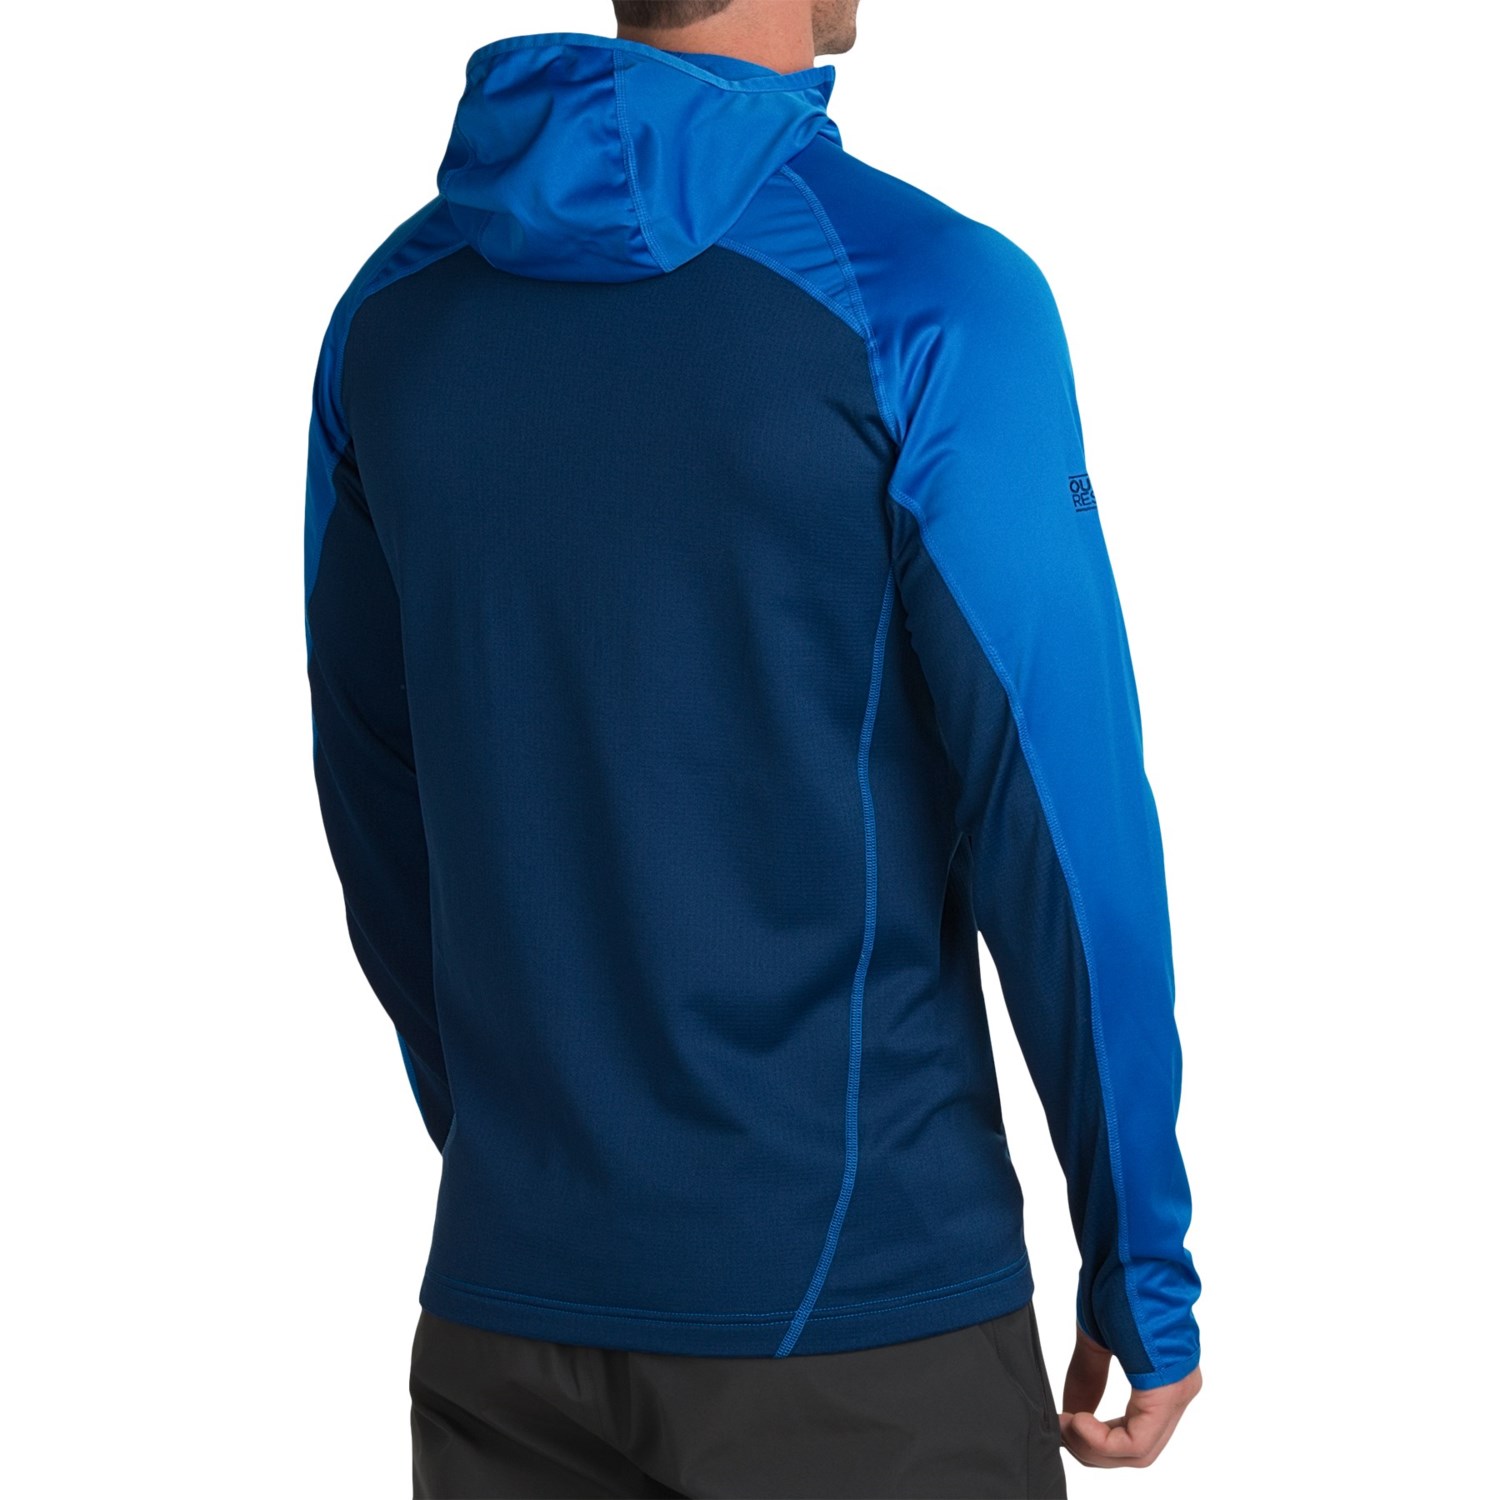 Outdoor Research Centrifuge Jacket (For Men) - Save 36%